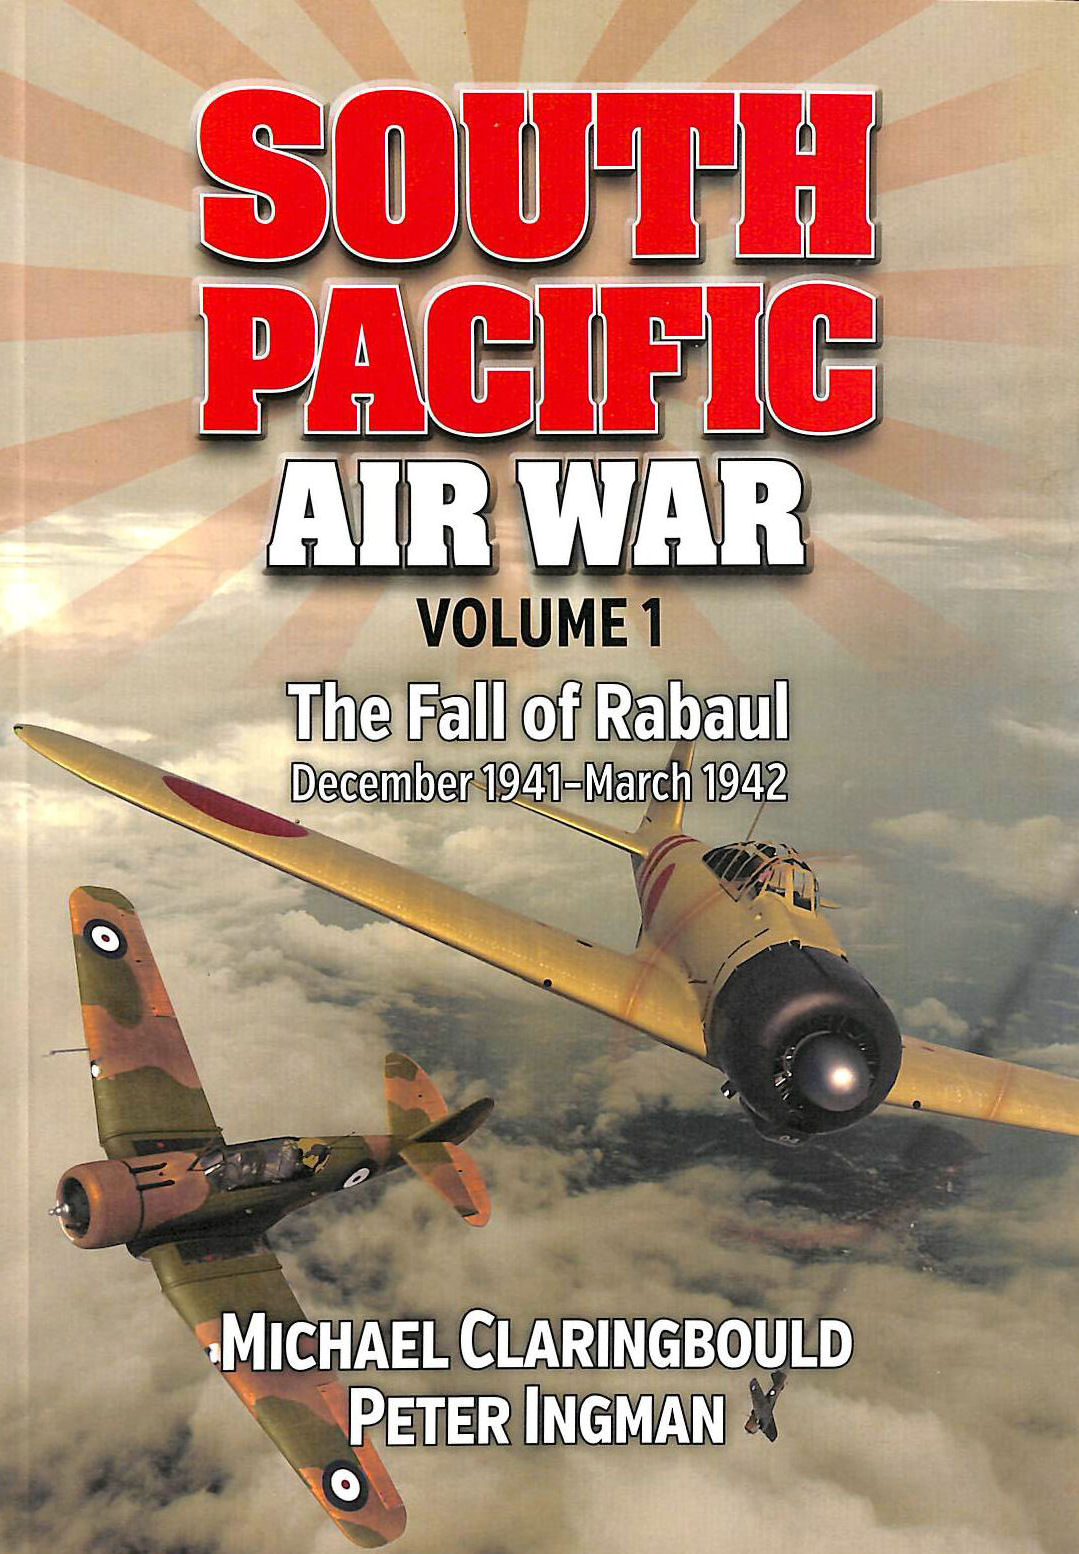 MICHAEL CLARINGBOULD, PETER INGMAN - South Pacific Air War Volume 1: The Fall of Rabaul December 1941 - March 1942